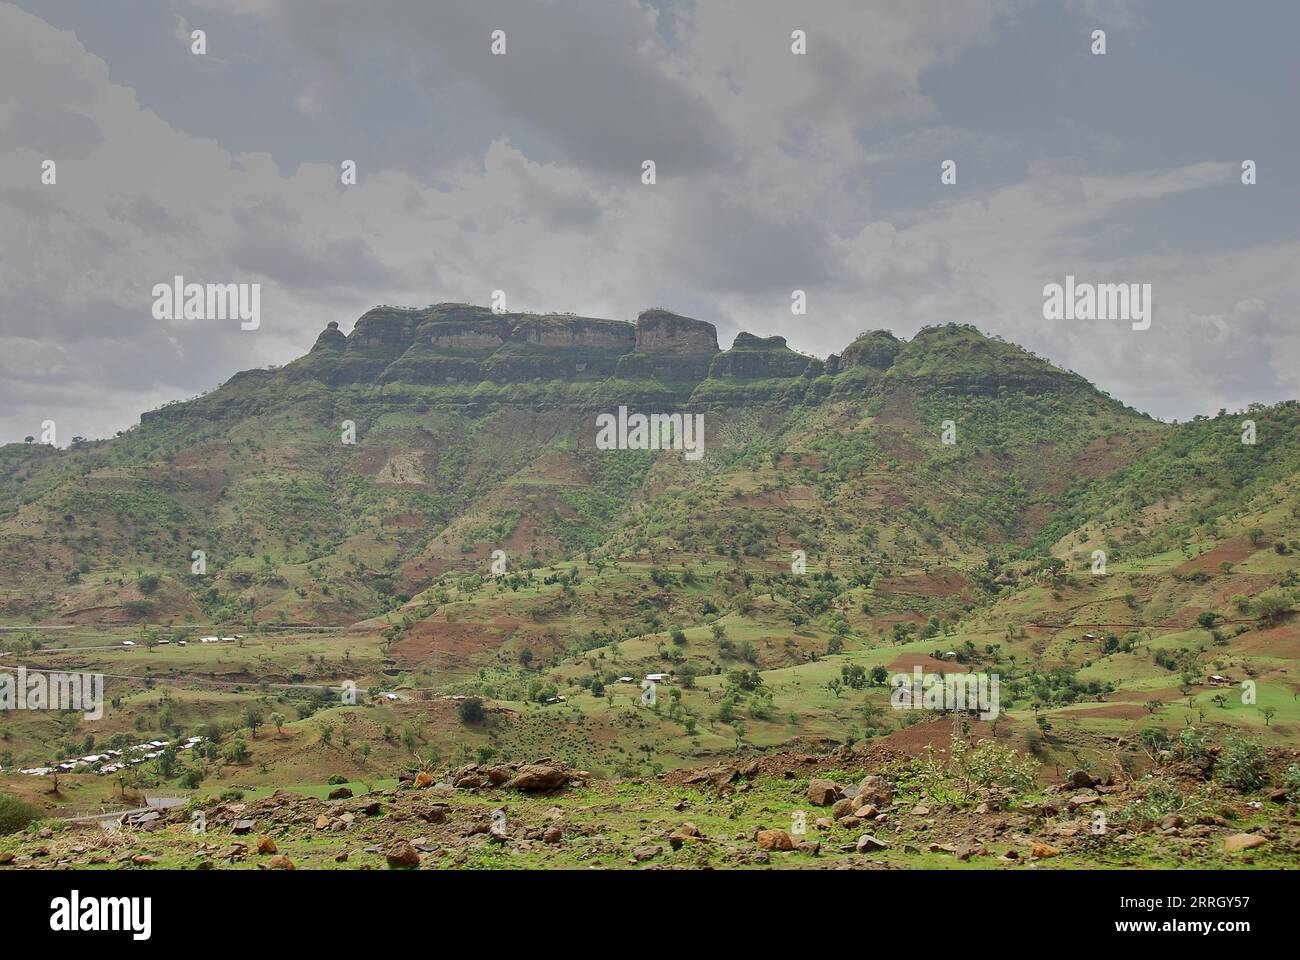 Landscape view of the secluded Simien Mountains National Park in Northern Ethiopia, Africa in a cloudy haze. Stock Photo